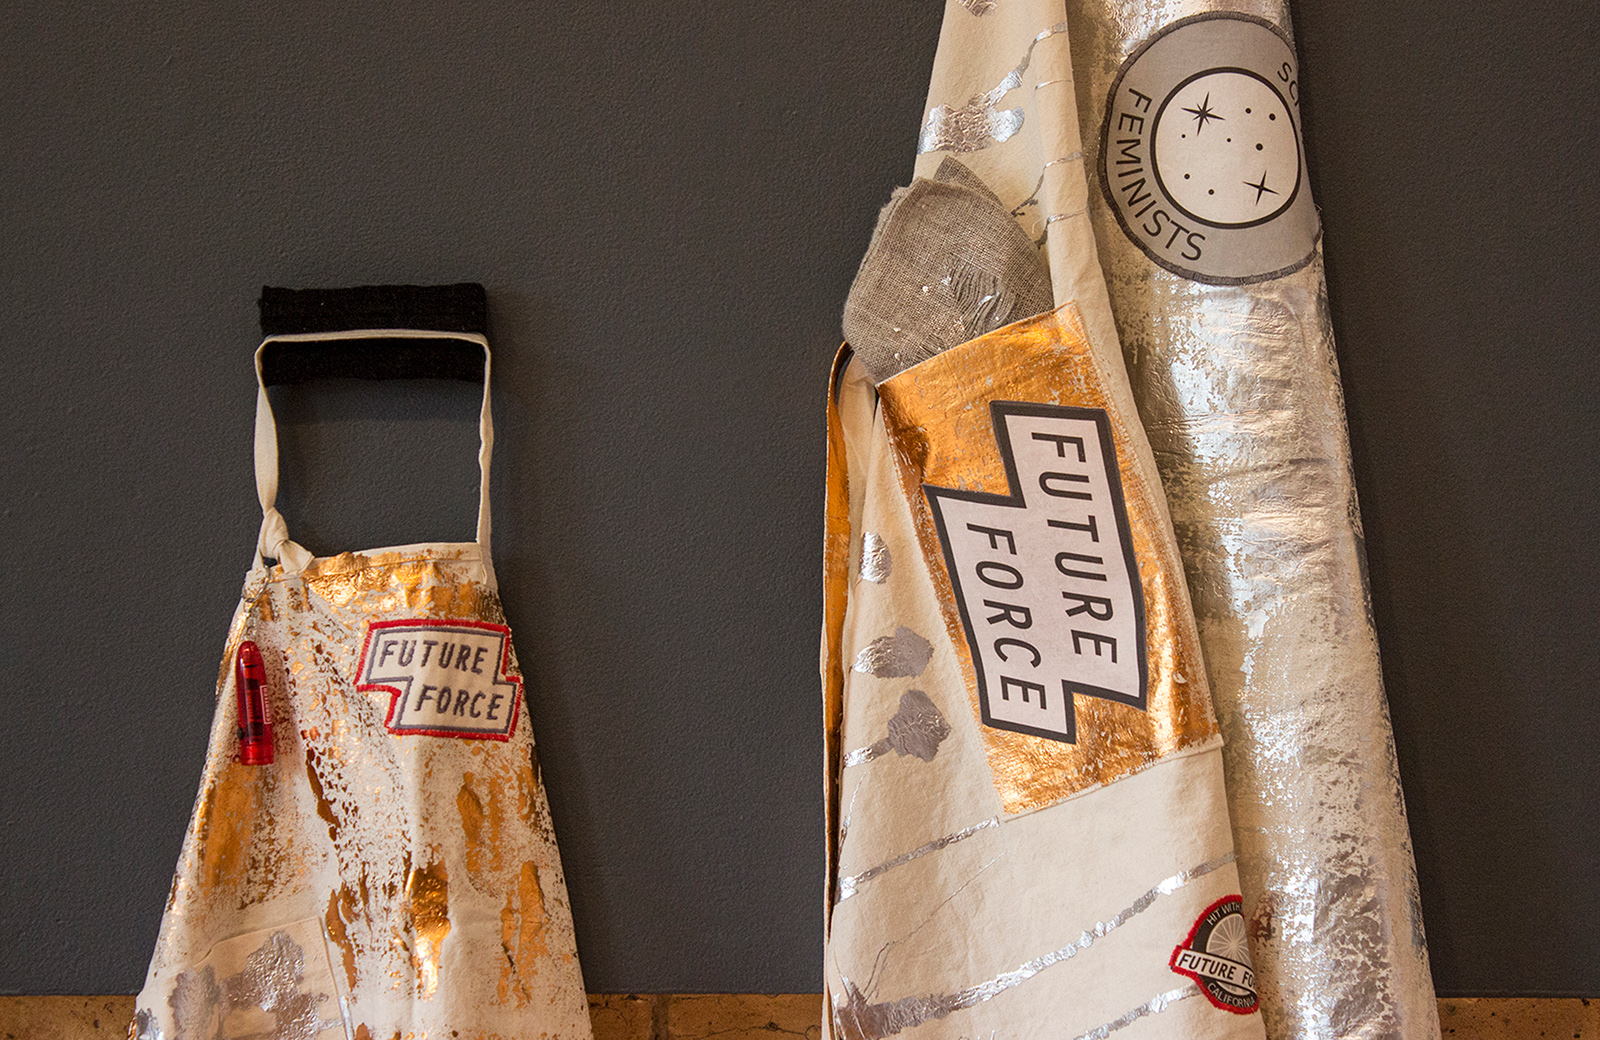  The Experimental Sound Studio, Chicago, 2014, Work Aprons: detail and installation view. Photo: Adam Liam Rose 